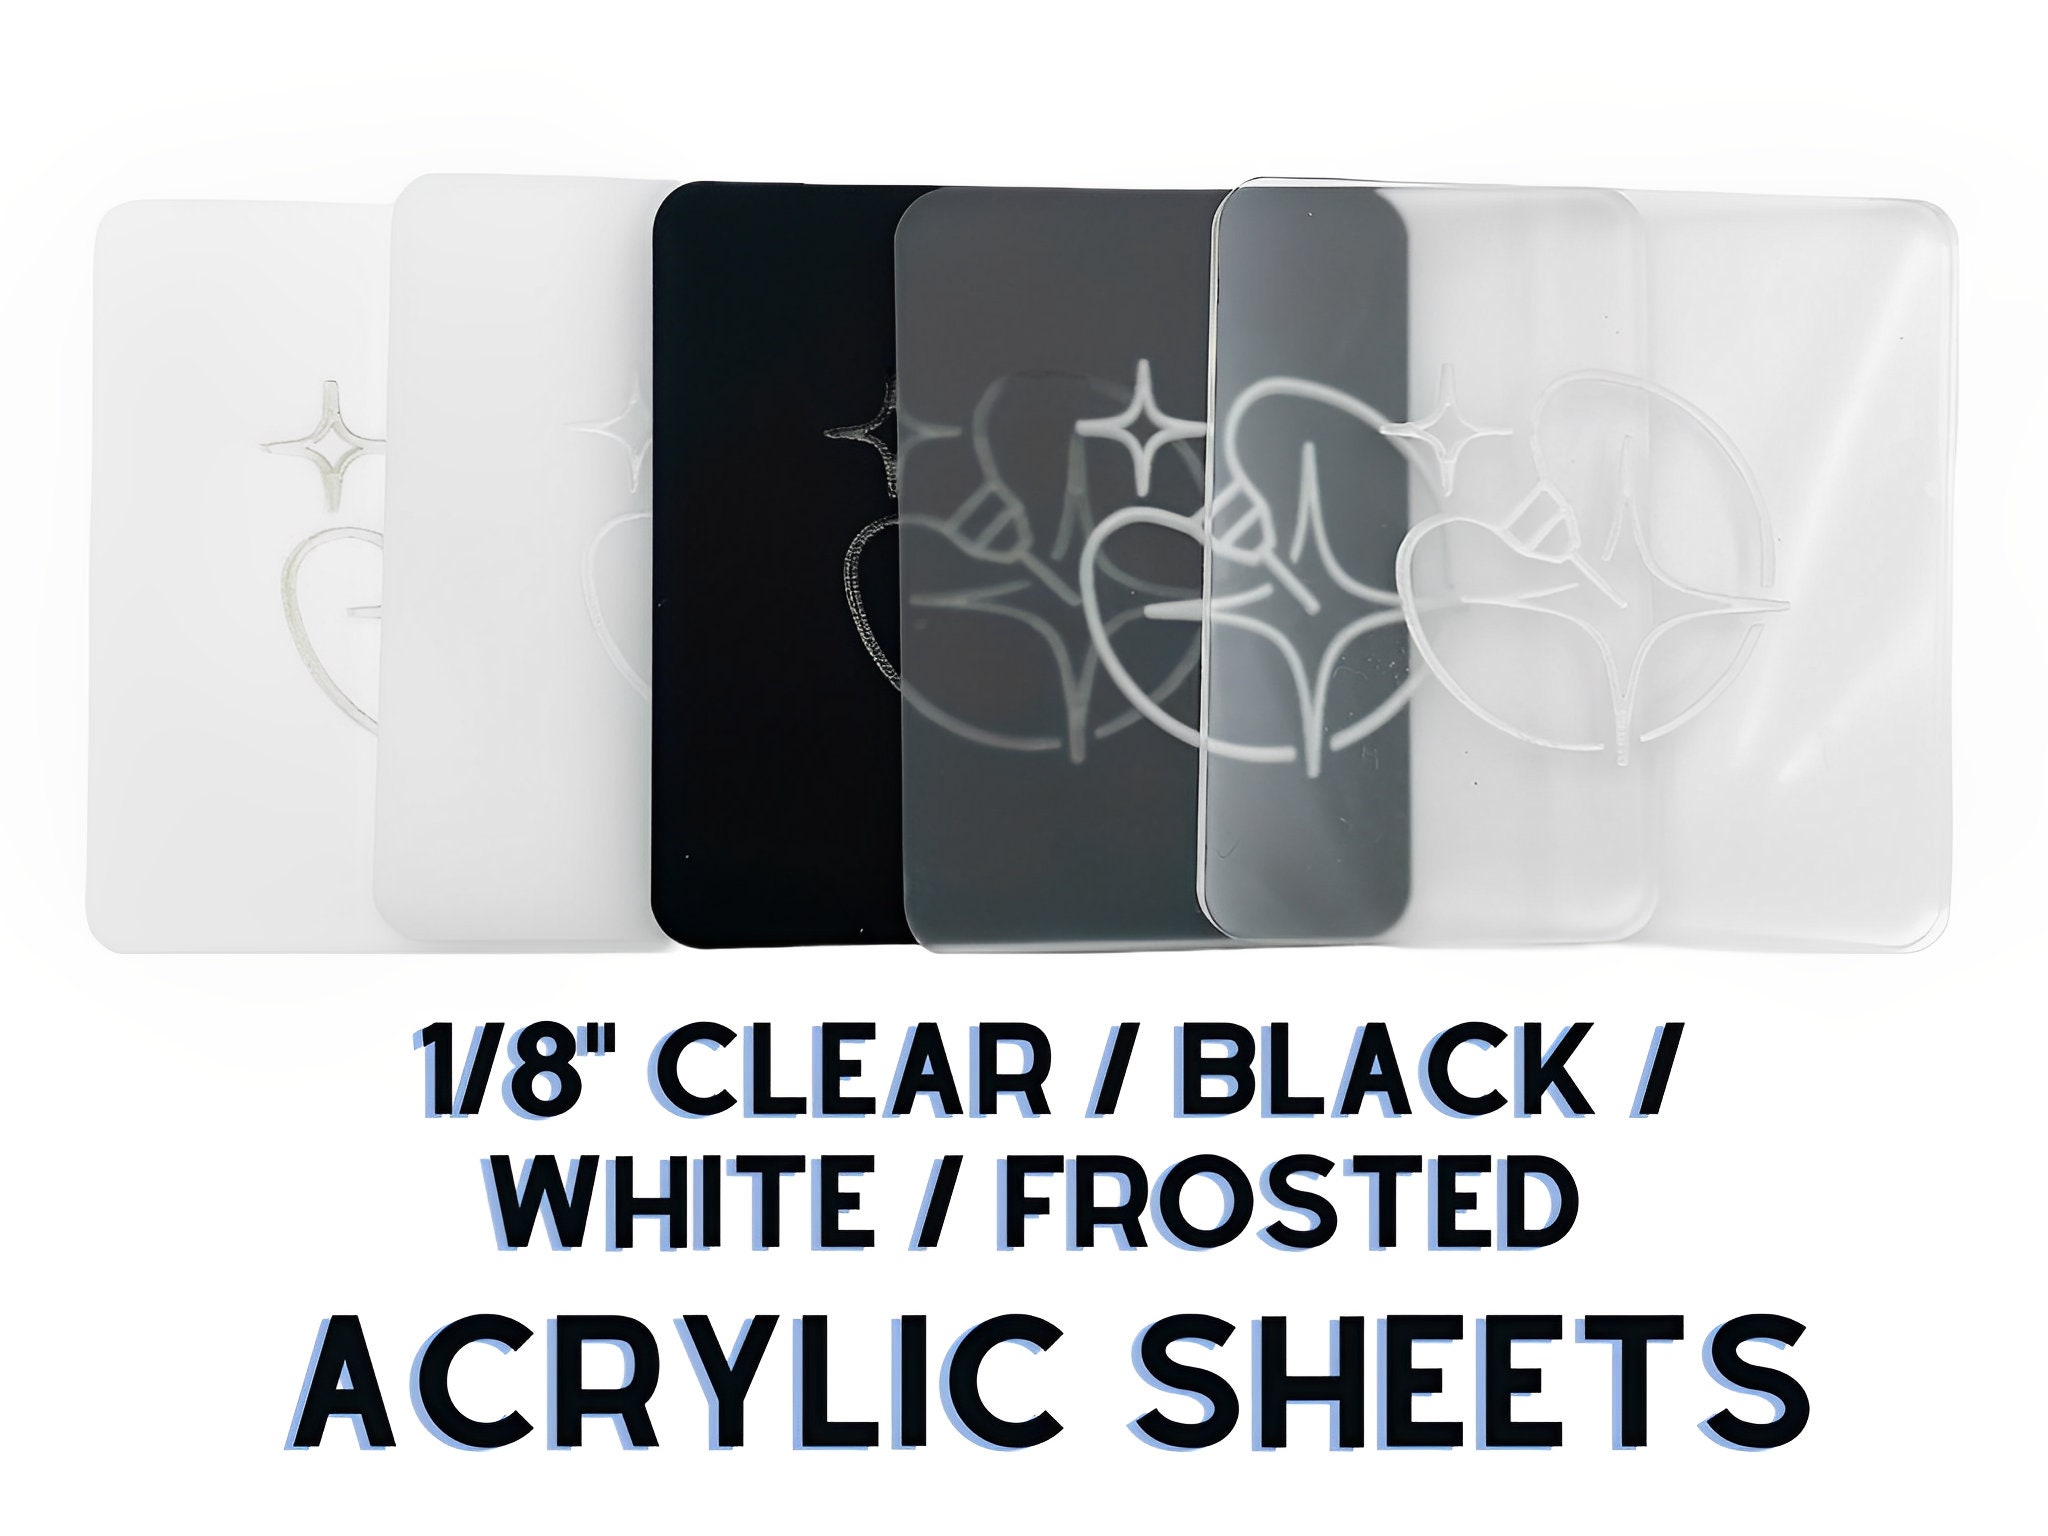 1/8 3mm Clear Cast Acrylic Sheets Crafts, School Projects, Painting,  Engrave, Laser Ready Trotec, Epilog and Glowforge 